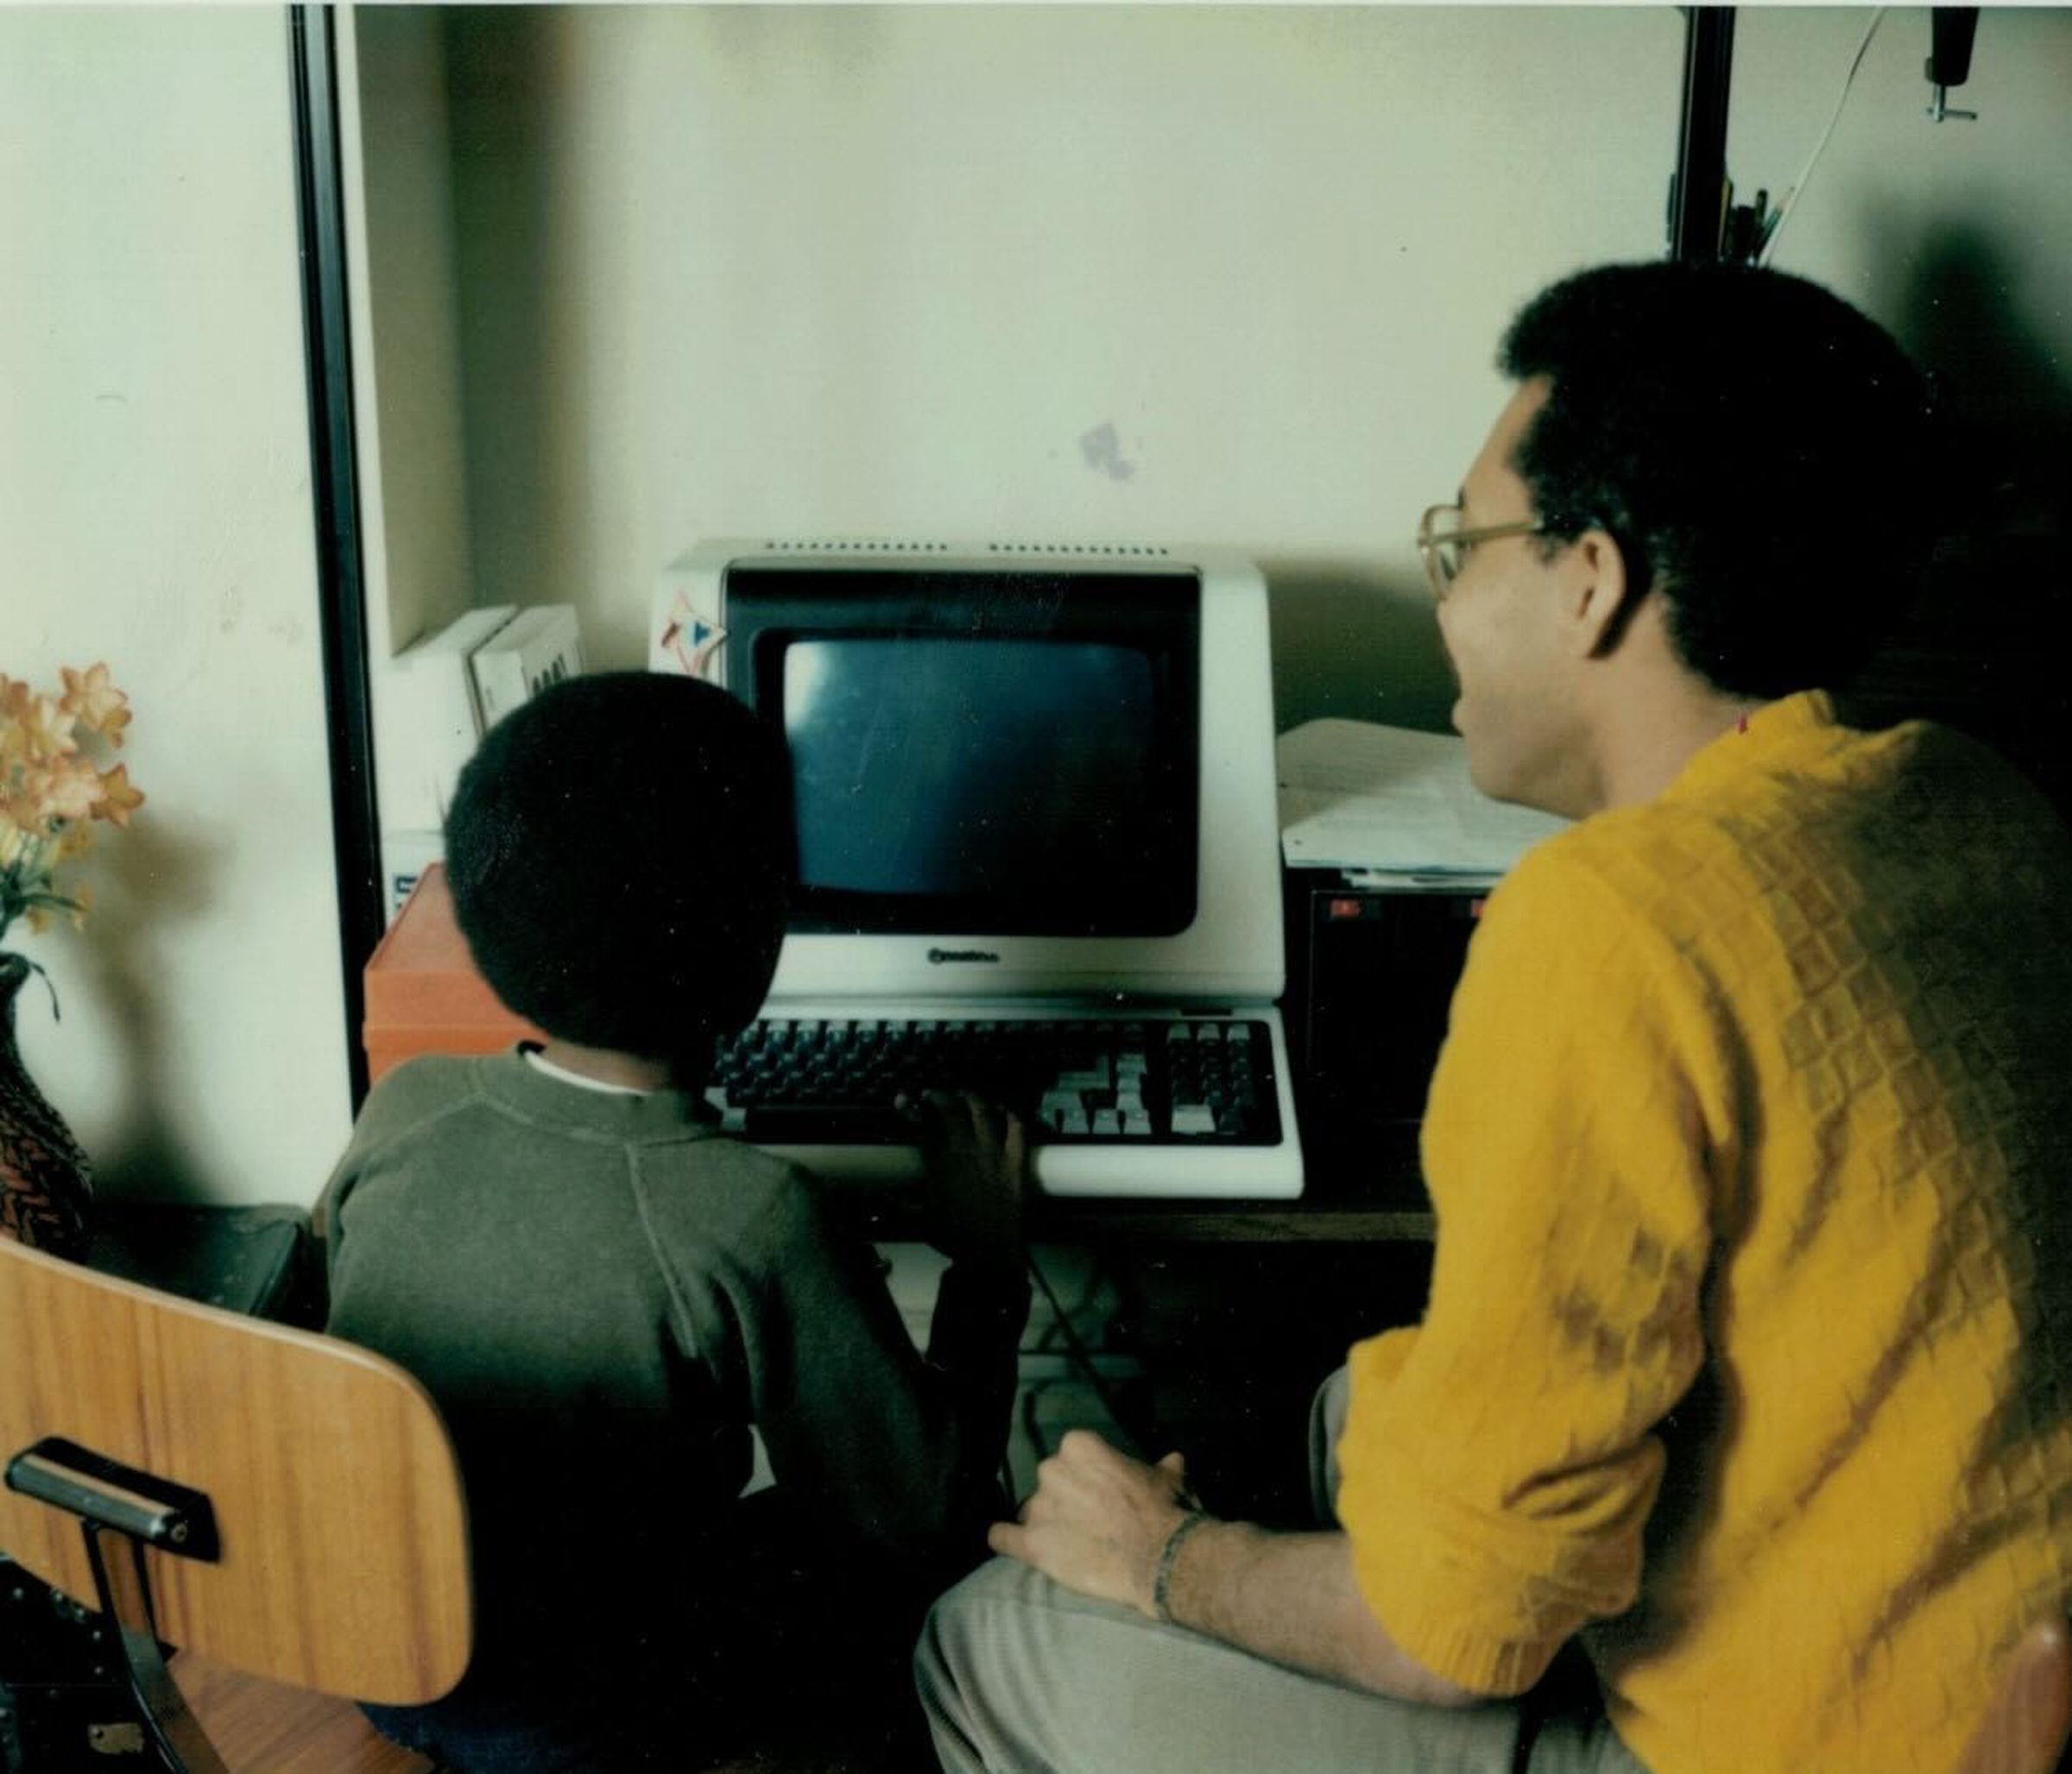 adult and child looking at computer together at desk